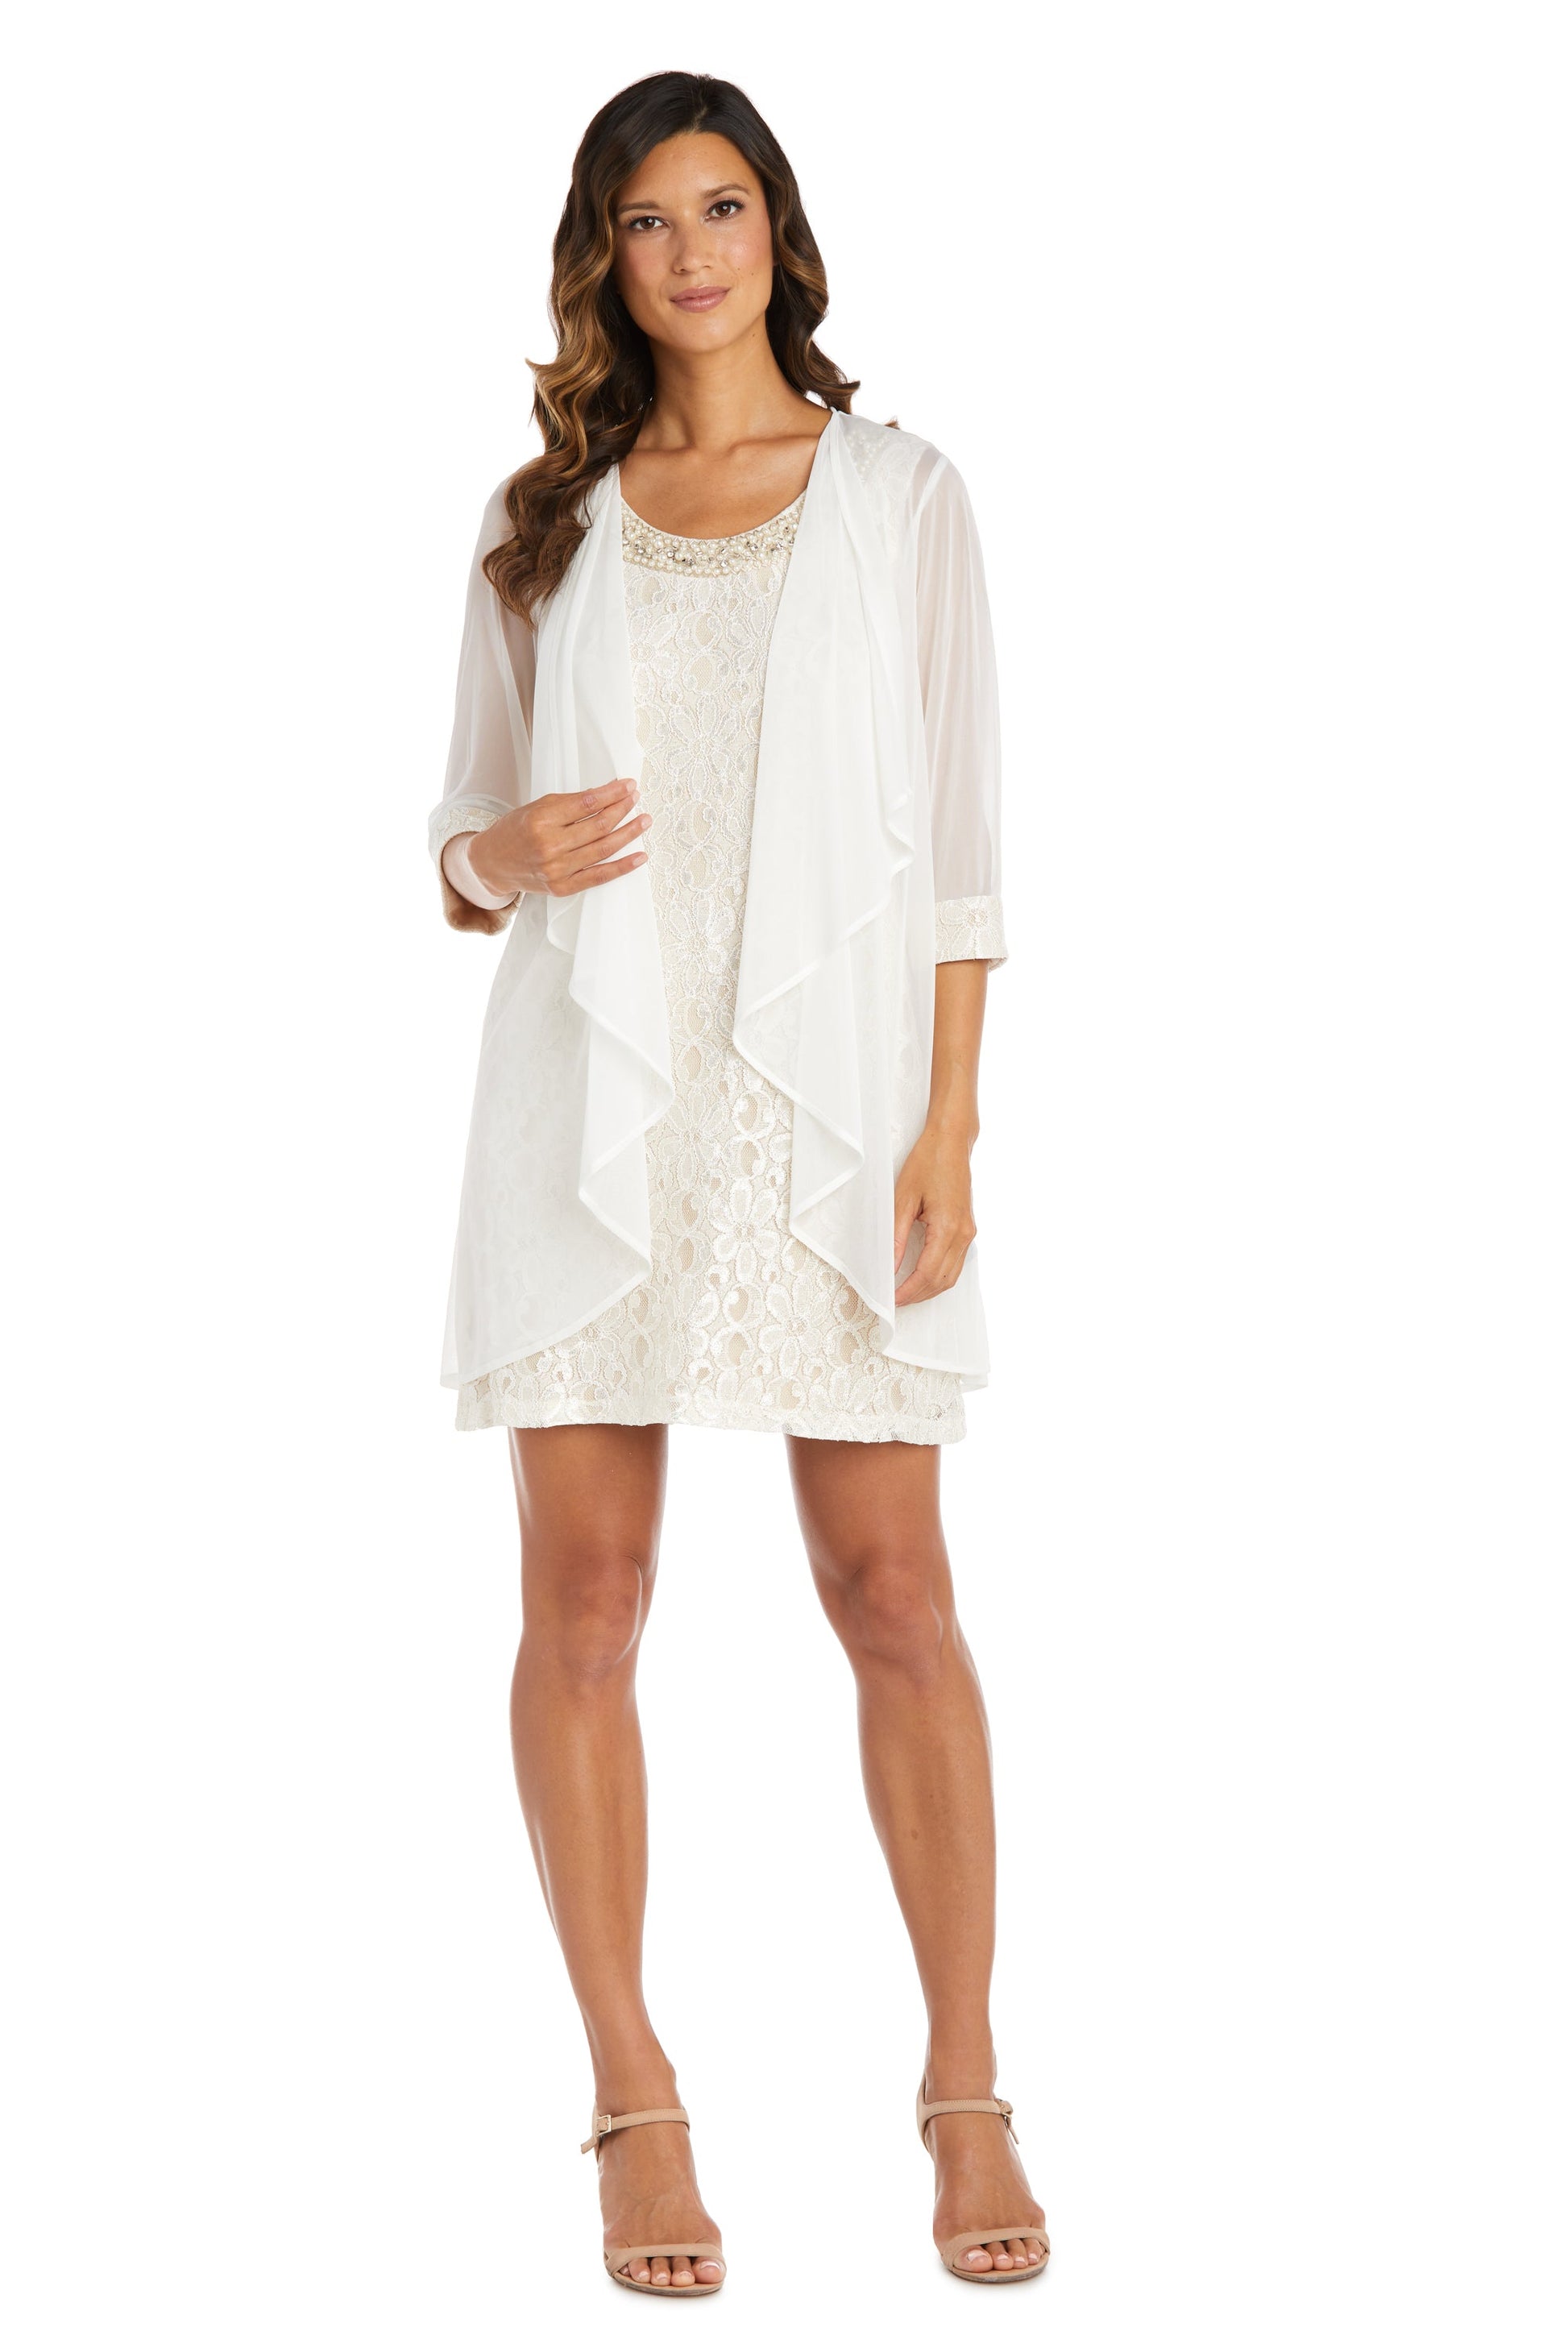 Women's Sheer Draped Jacket and Pearl-Embellished Lace Shift Dress